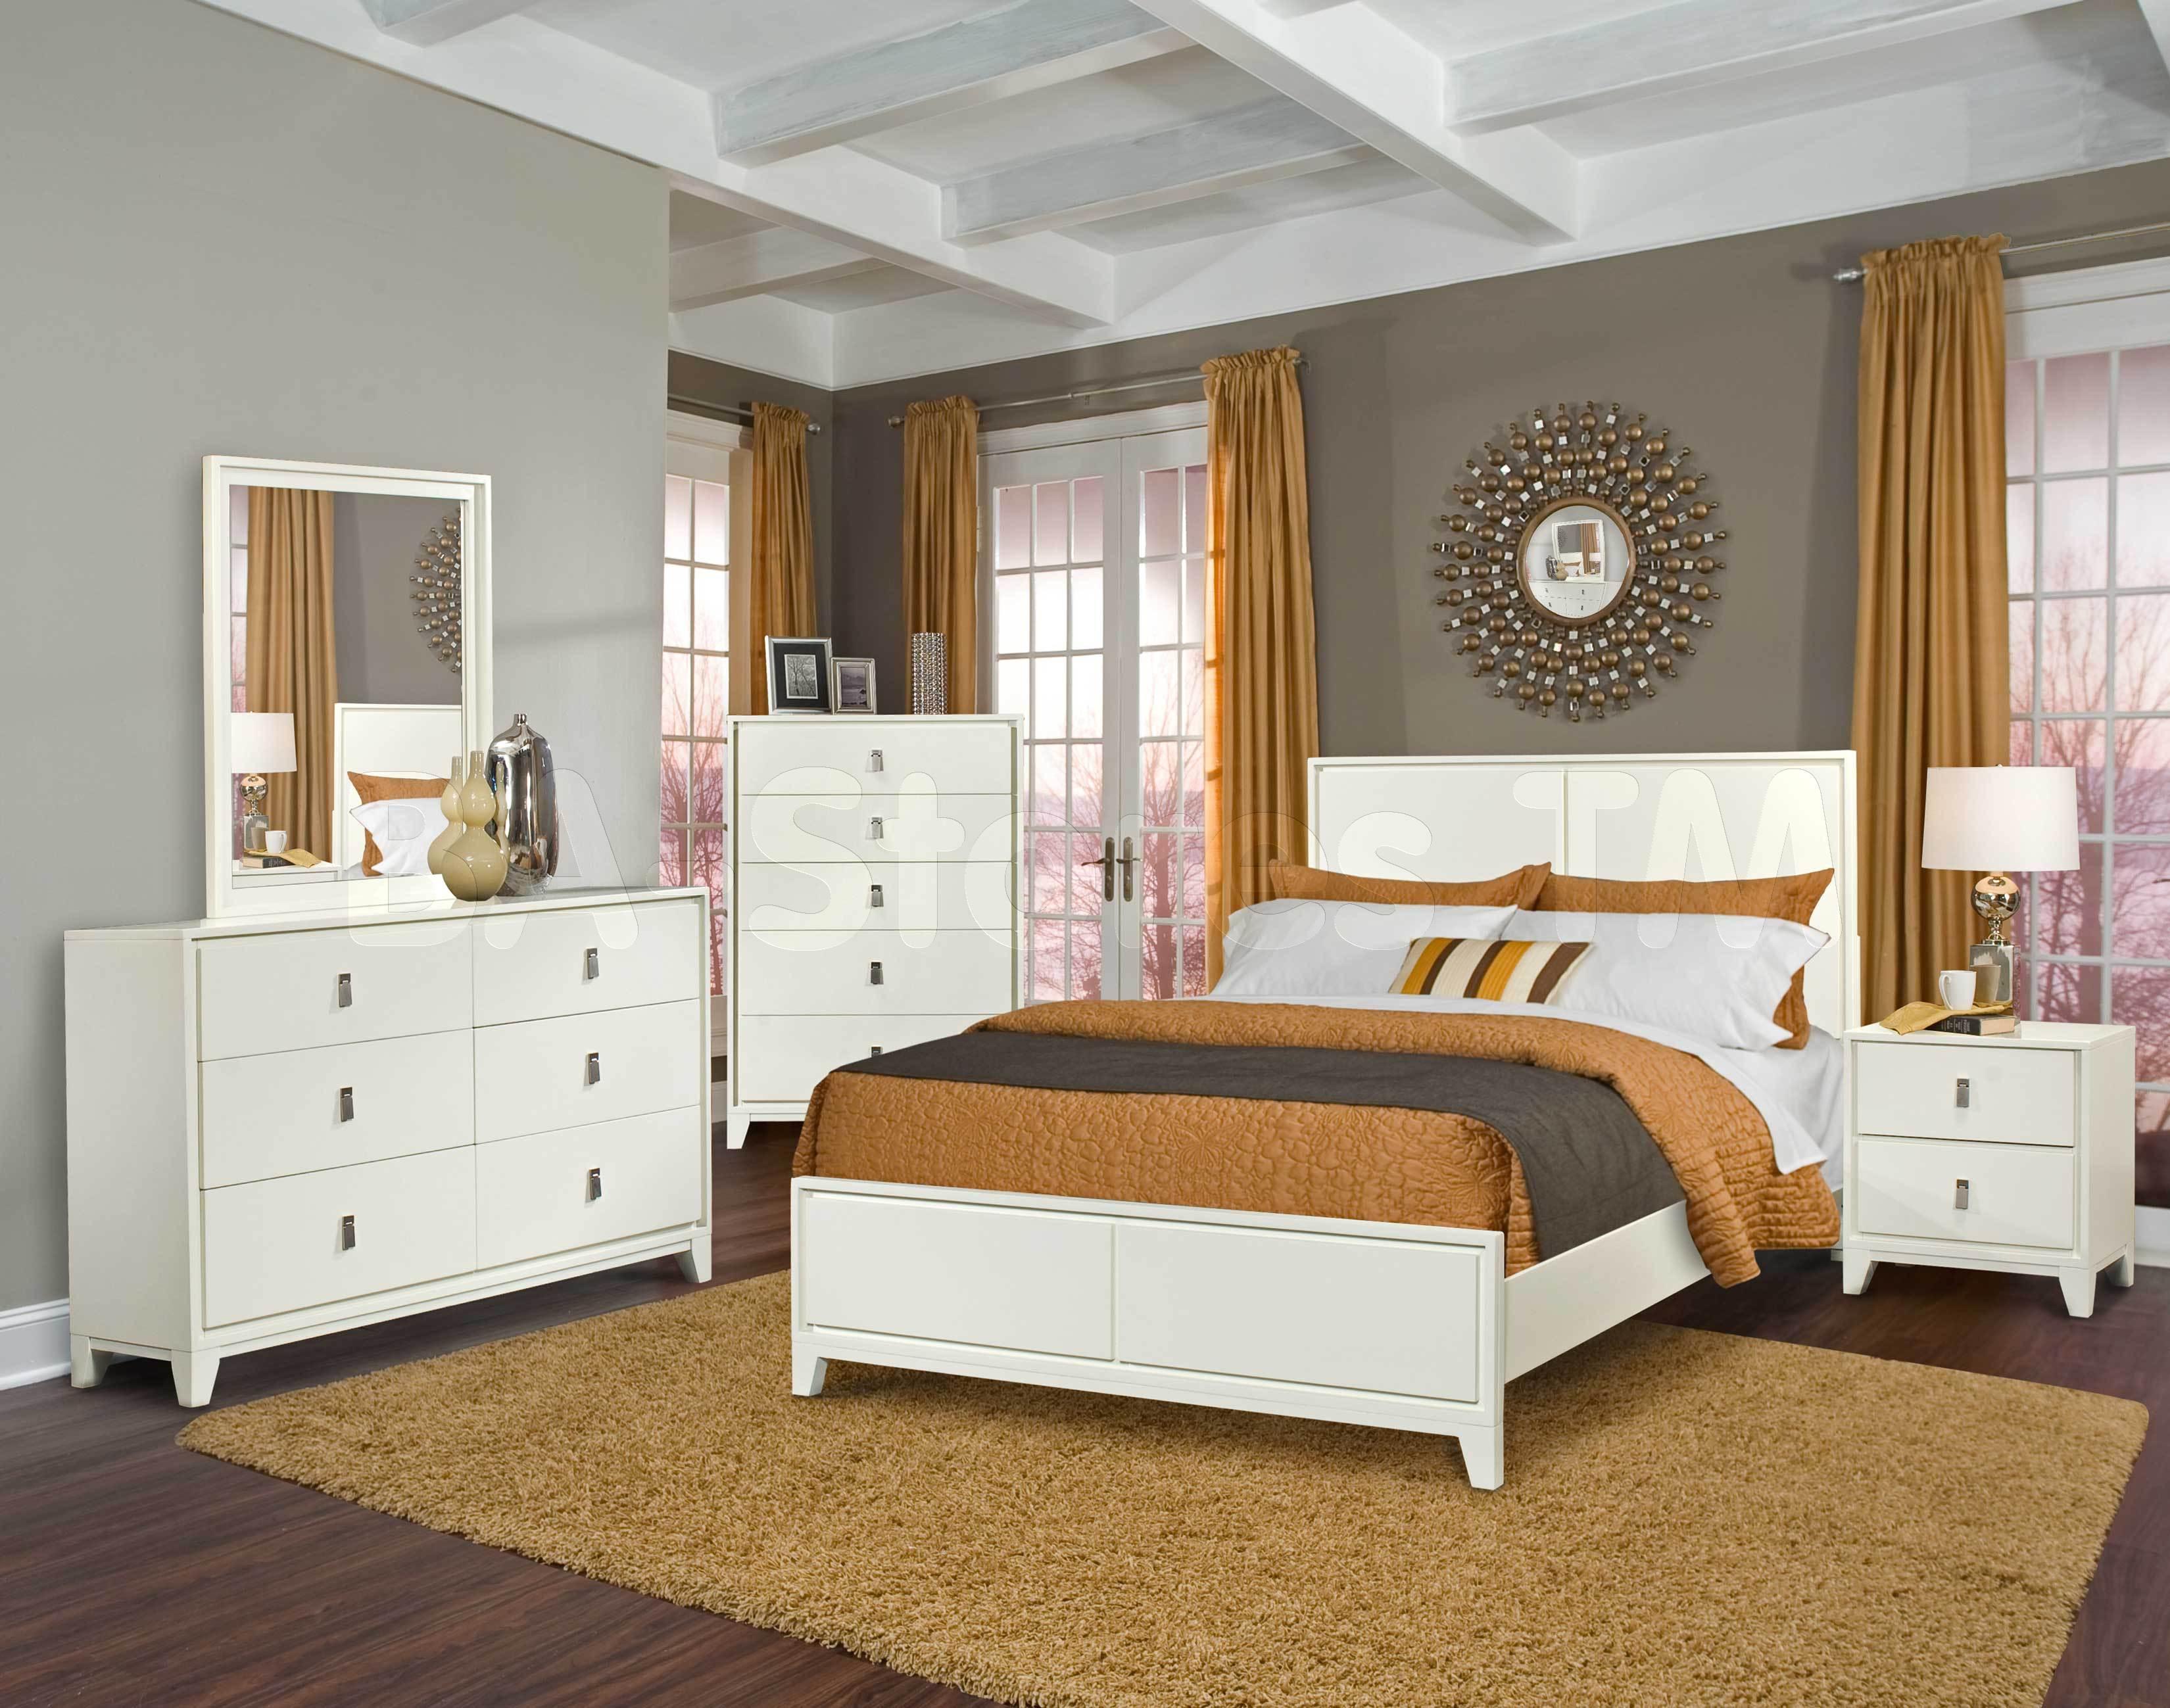 17 Timeless Bedroom Designs With Wooden Furniture For